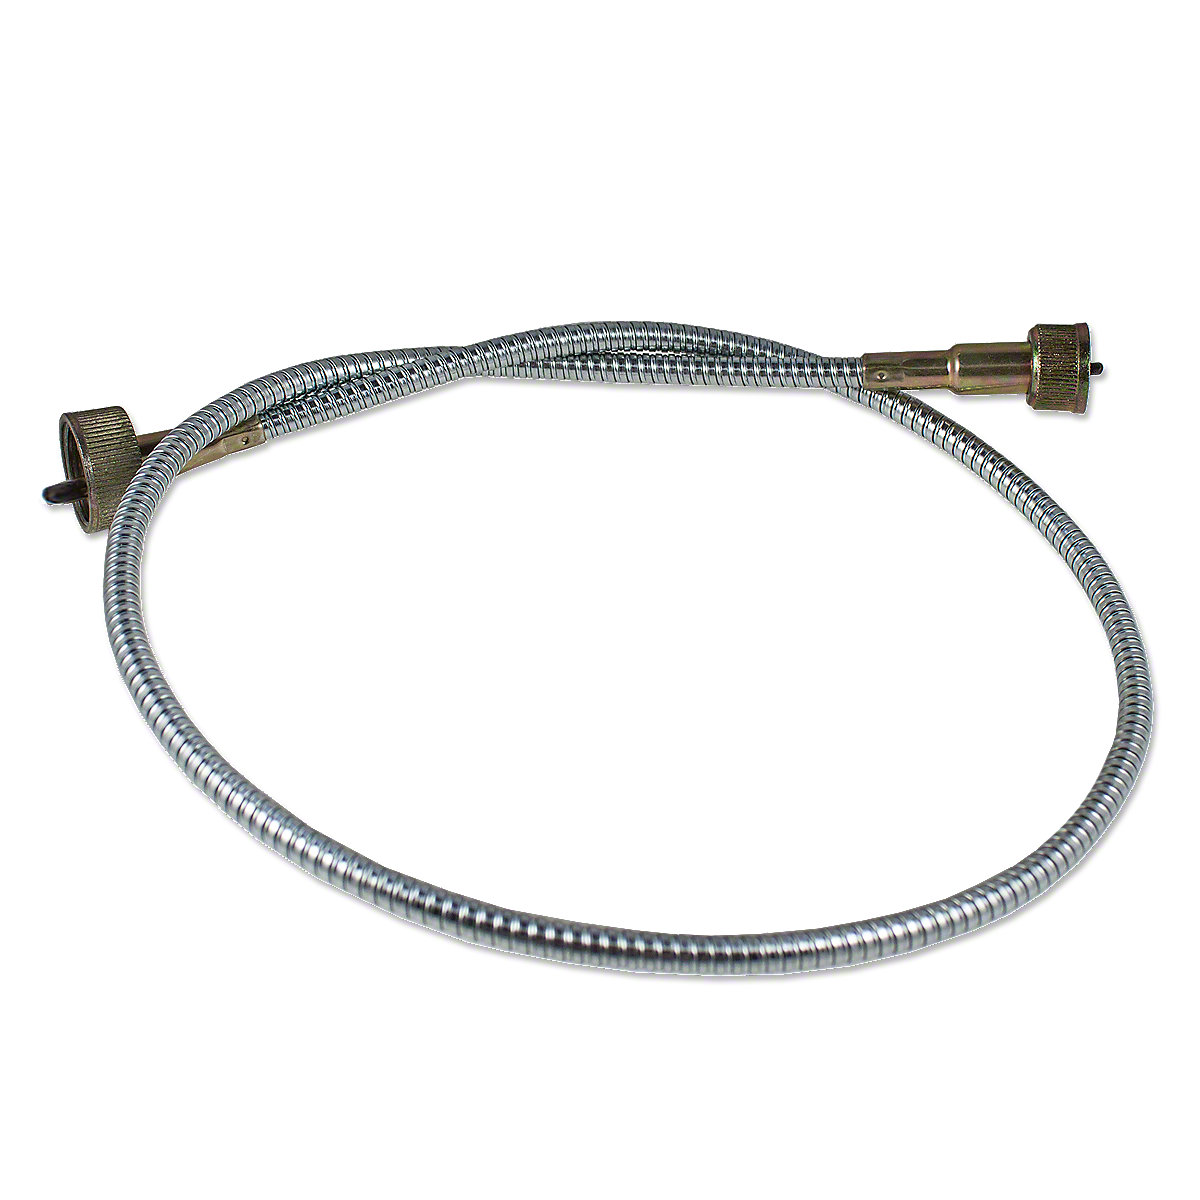 Tachometer Cable For Massey Ferguson: 40, TO35, 50, 135, 150, 165, 175, 35, Massey Harris: 50.